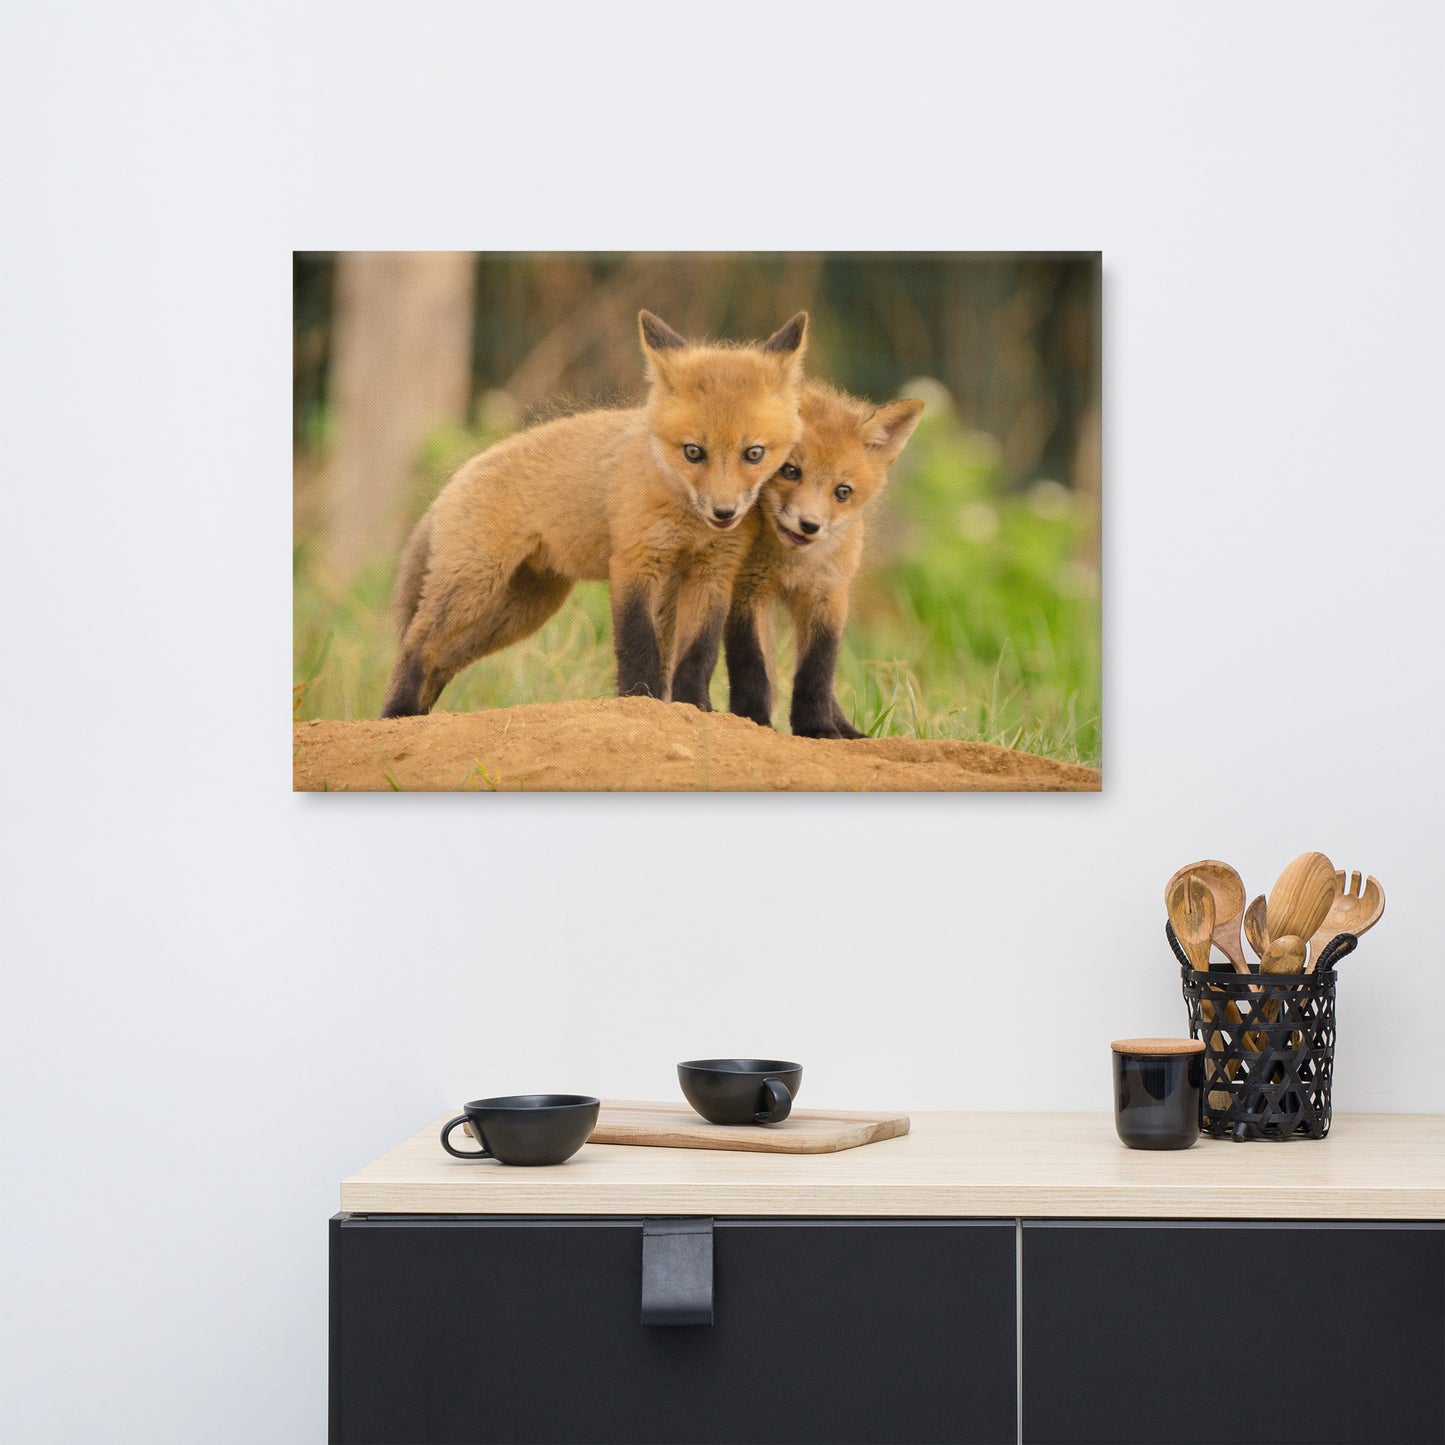 Cool Wall Art For Bedroom: Close to You Baby Fox Pups - Animal / Wildlife / Nature Photograph Wall Art Print- Artwork - Wall Decor